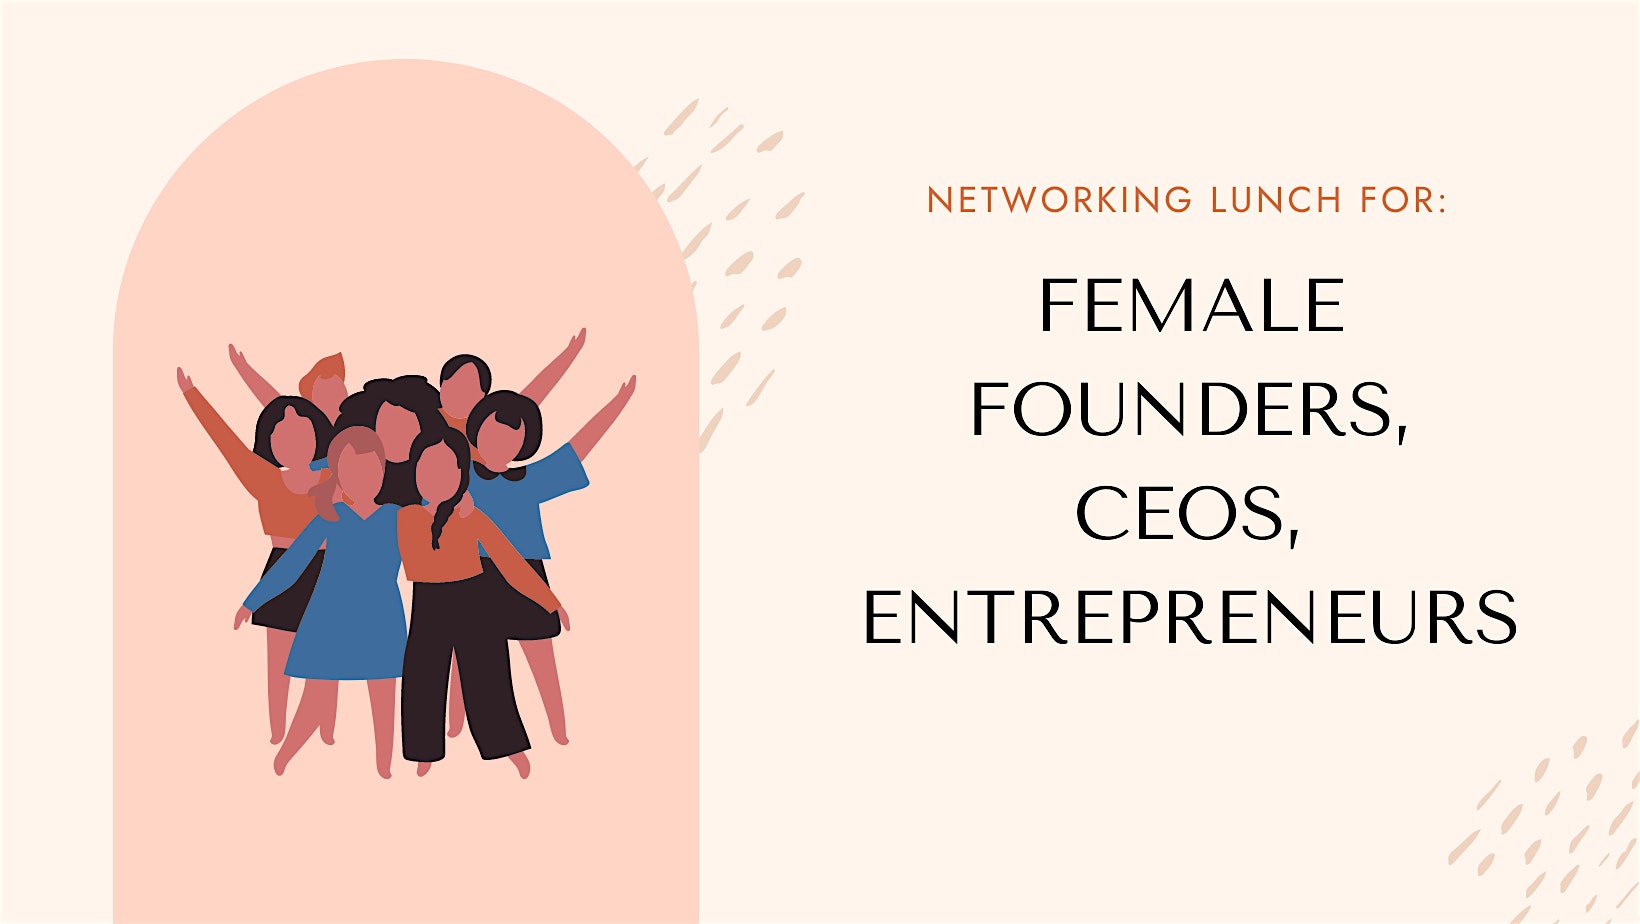 Networking lunch for female founders, business owners & CEOs